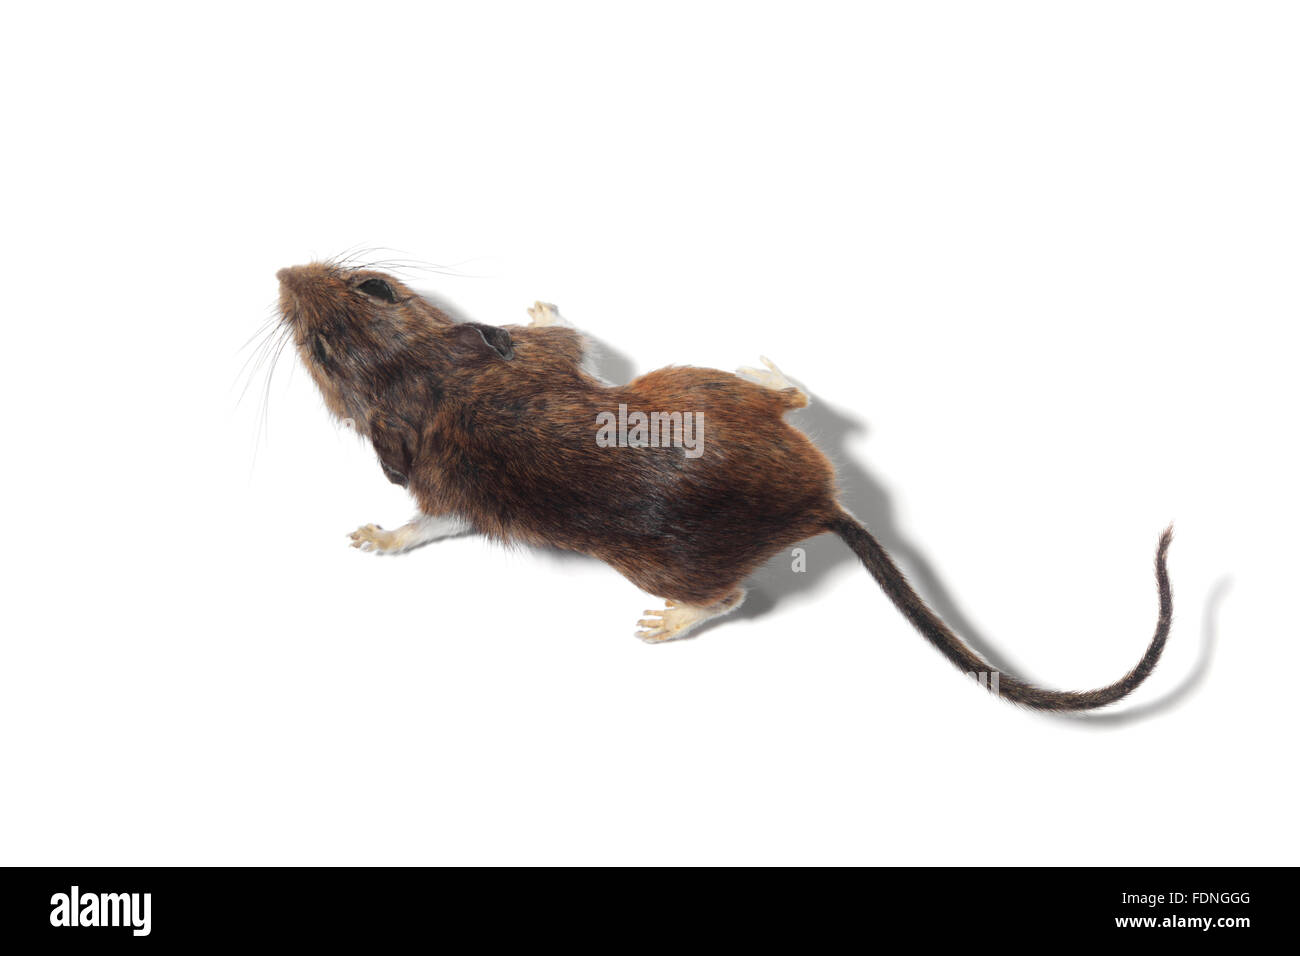 Studio shot of a mouse on white background Stock Photo